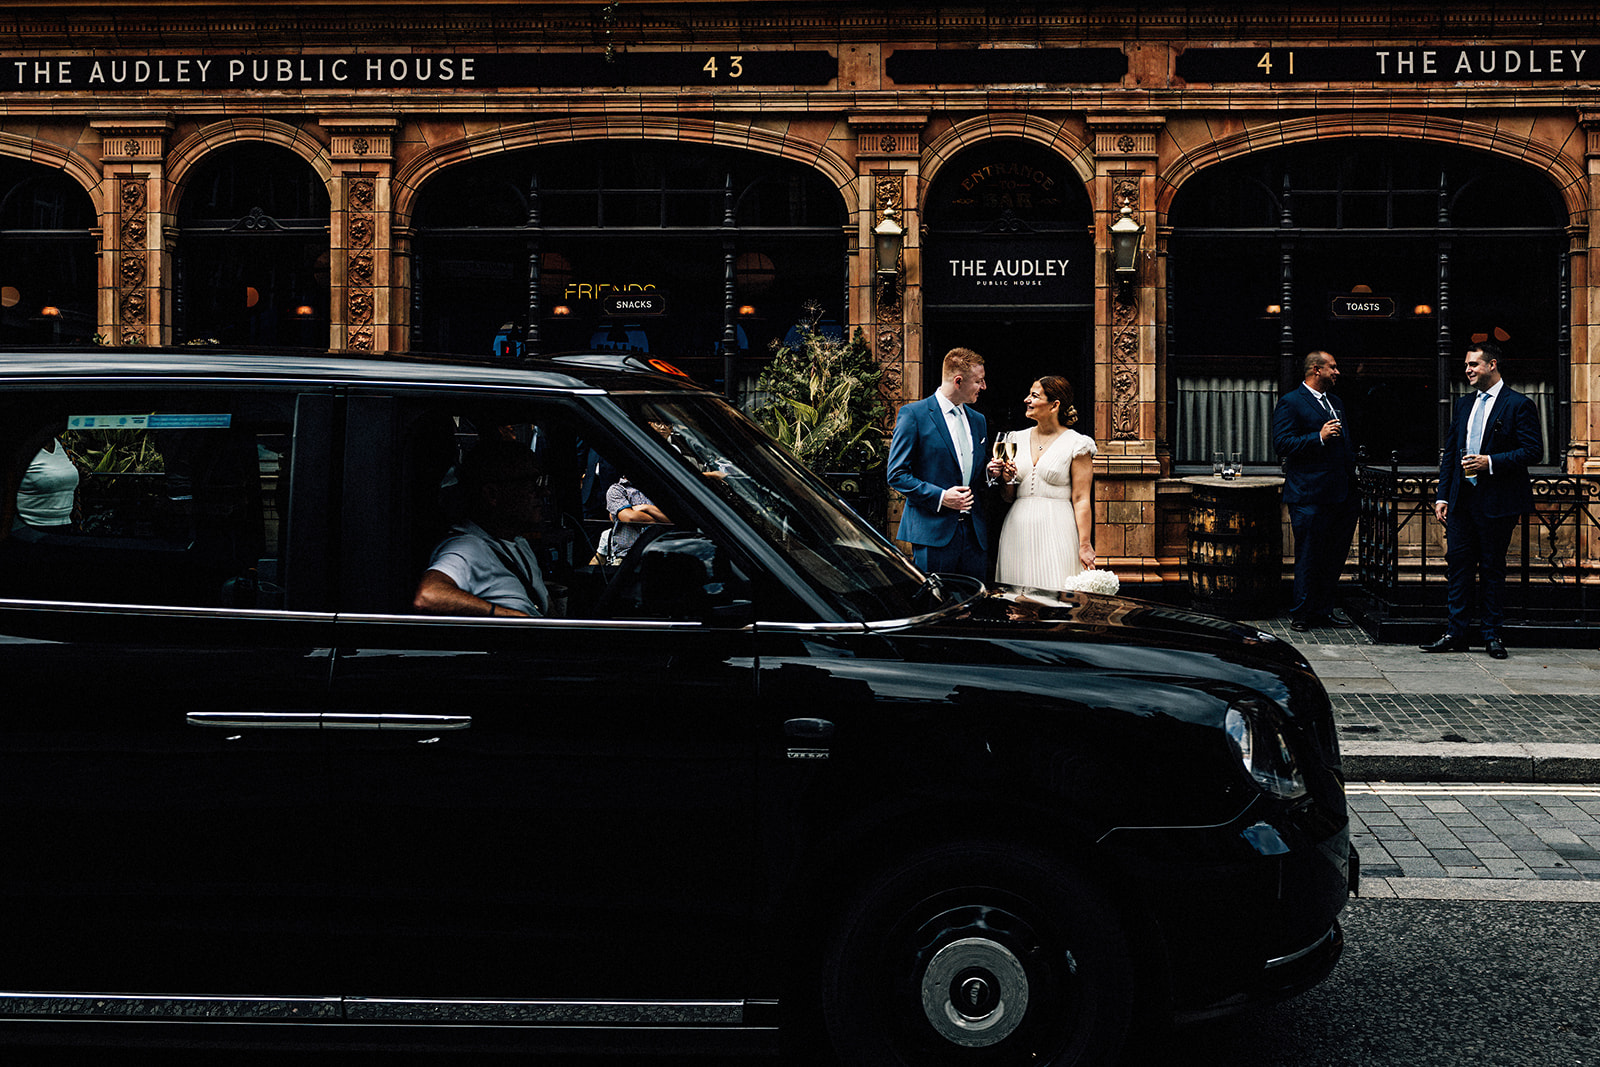 bride and groom documentary portrait on streets of Mayfair, London holding glasses of champagne outside The Audley pub with black taxi cab driving past.